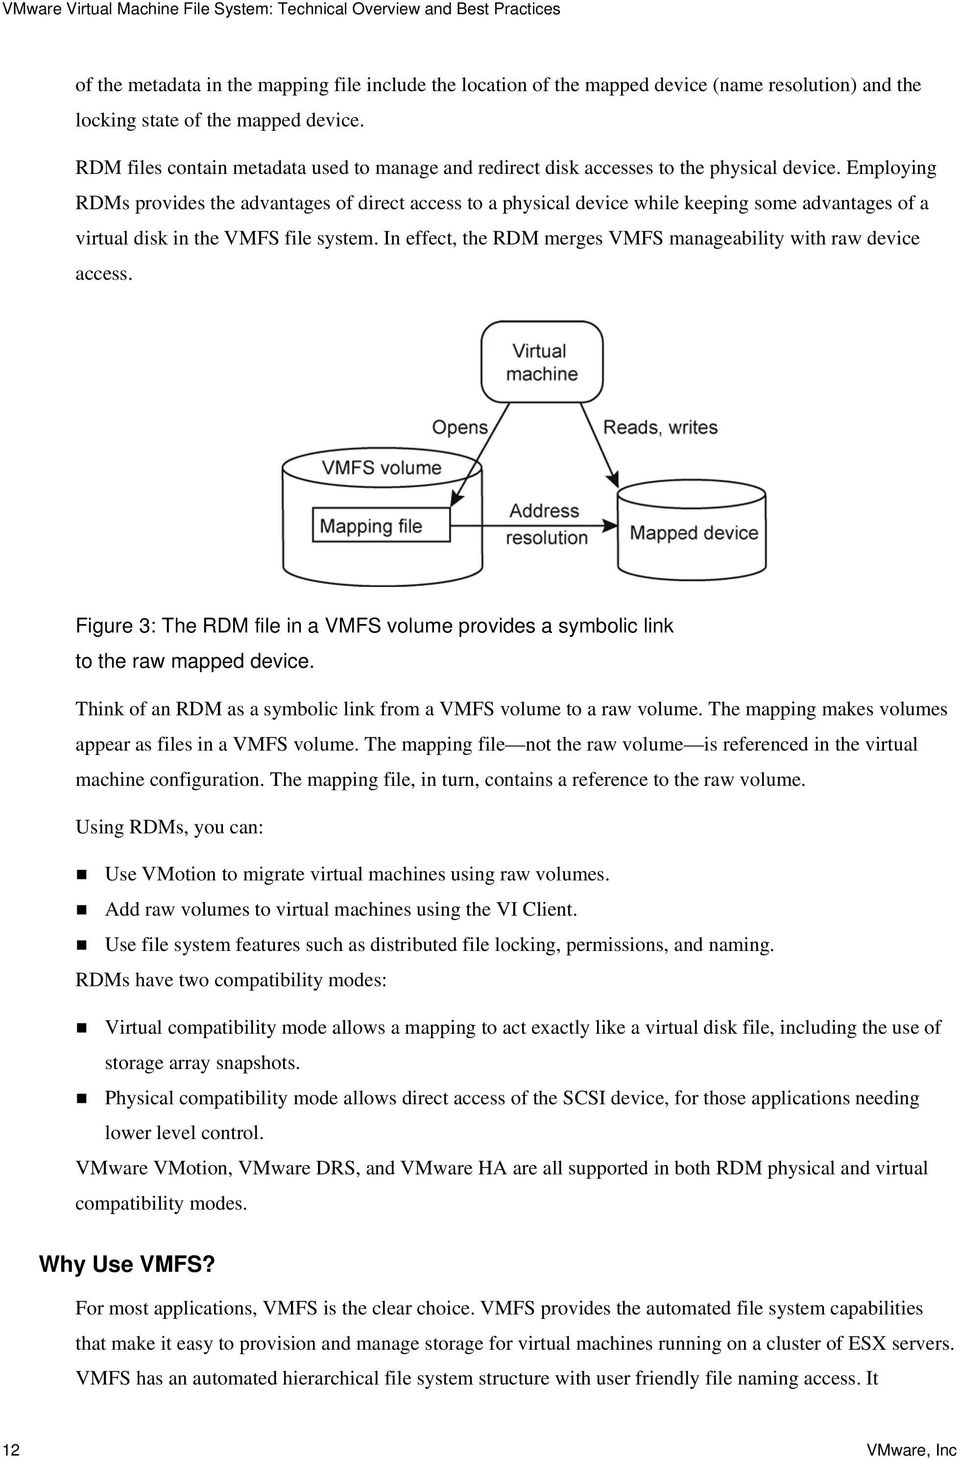 Employing RDMs provides the advantages of direct access to a physical device while keeping some advantages of a virtual disk in the VMFS file system.